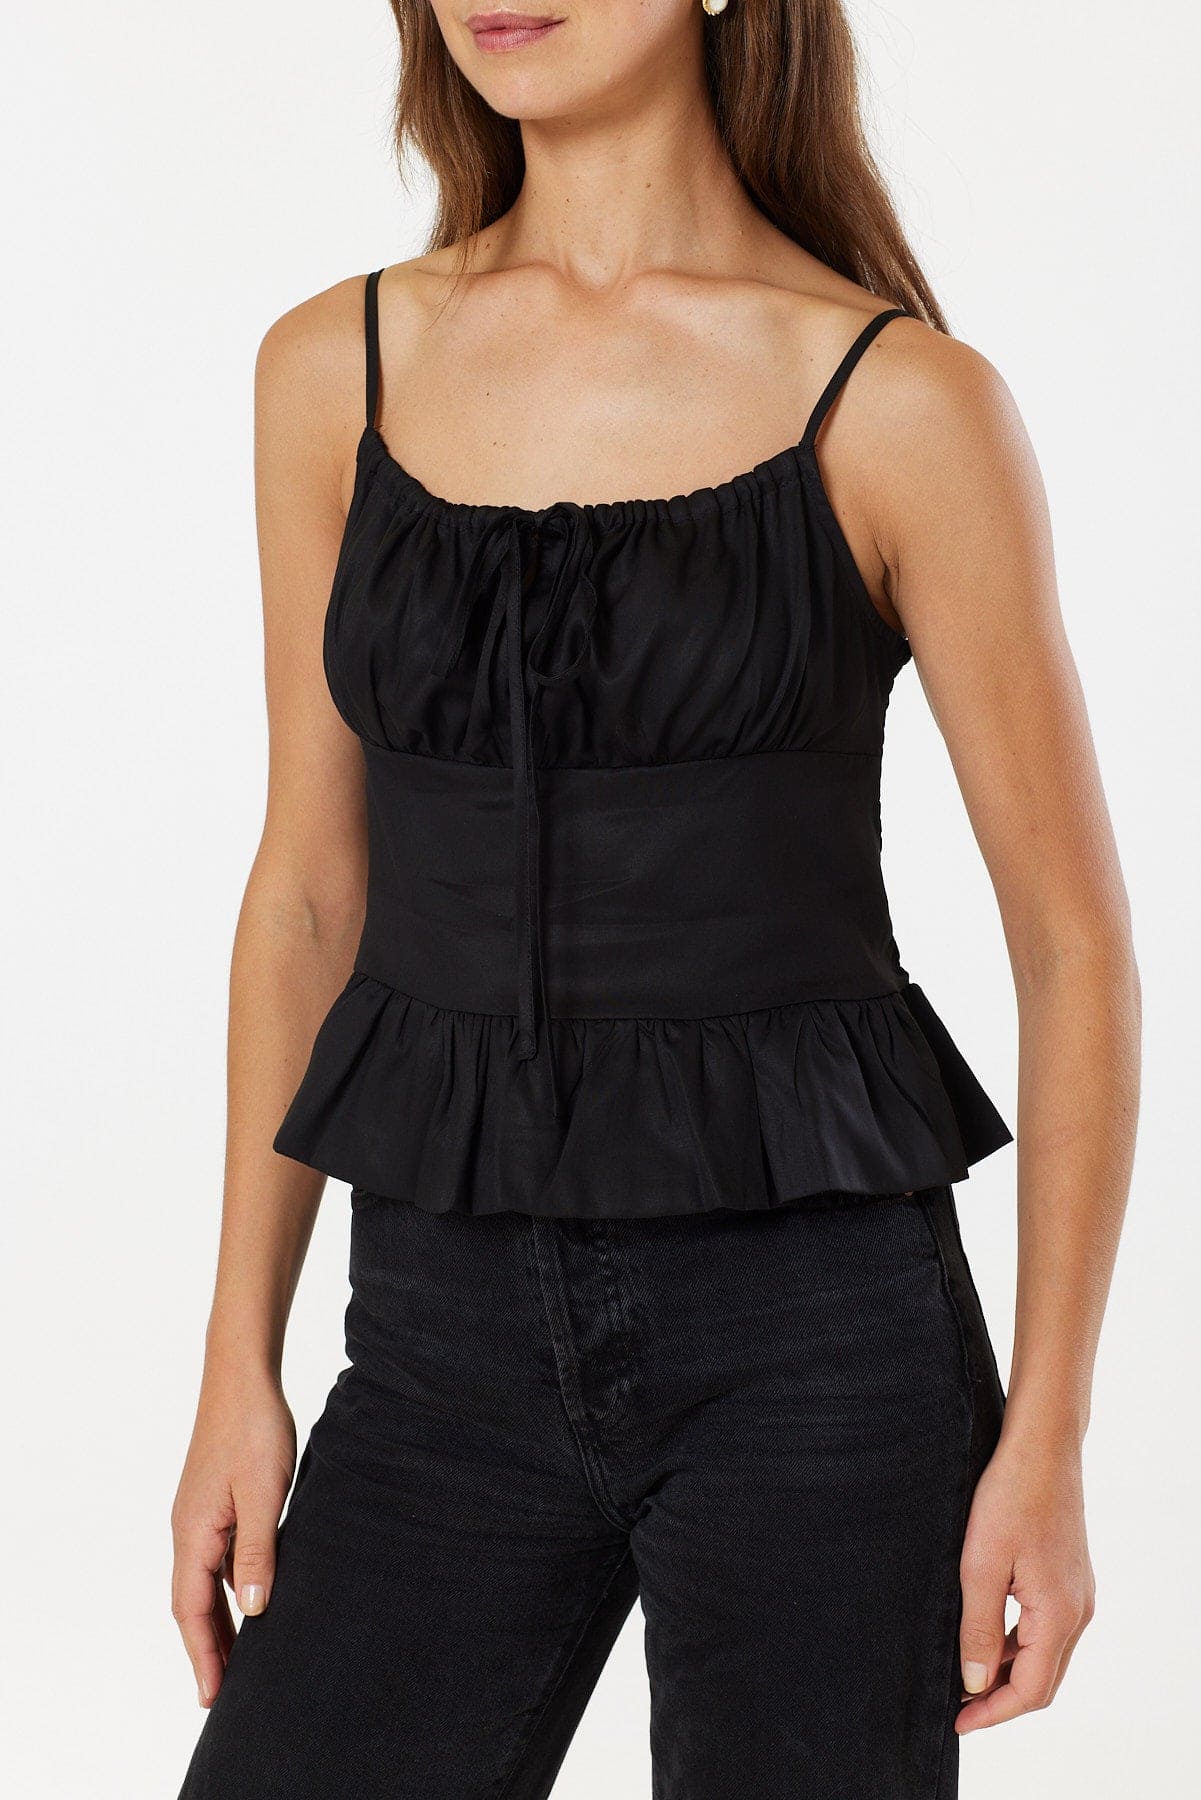 Cropped Milk Maid Top In Black With Straps